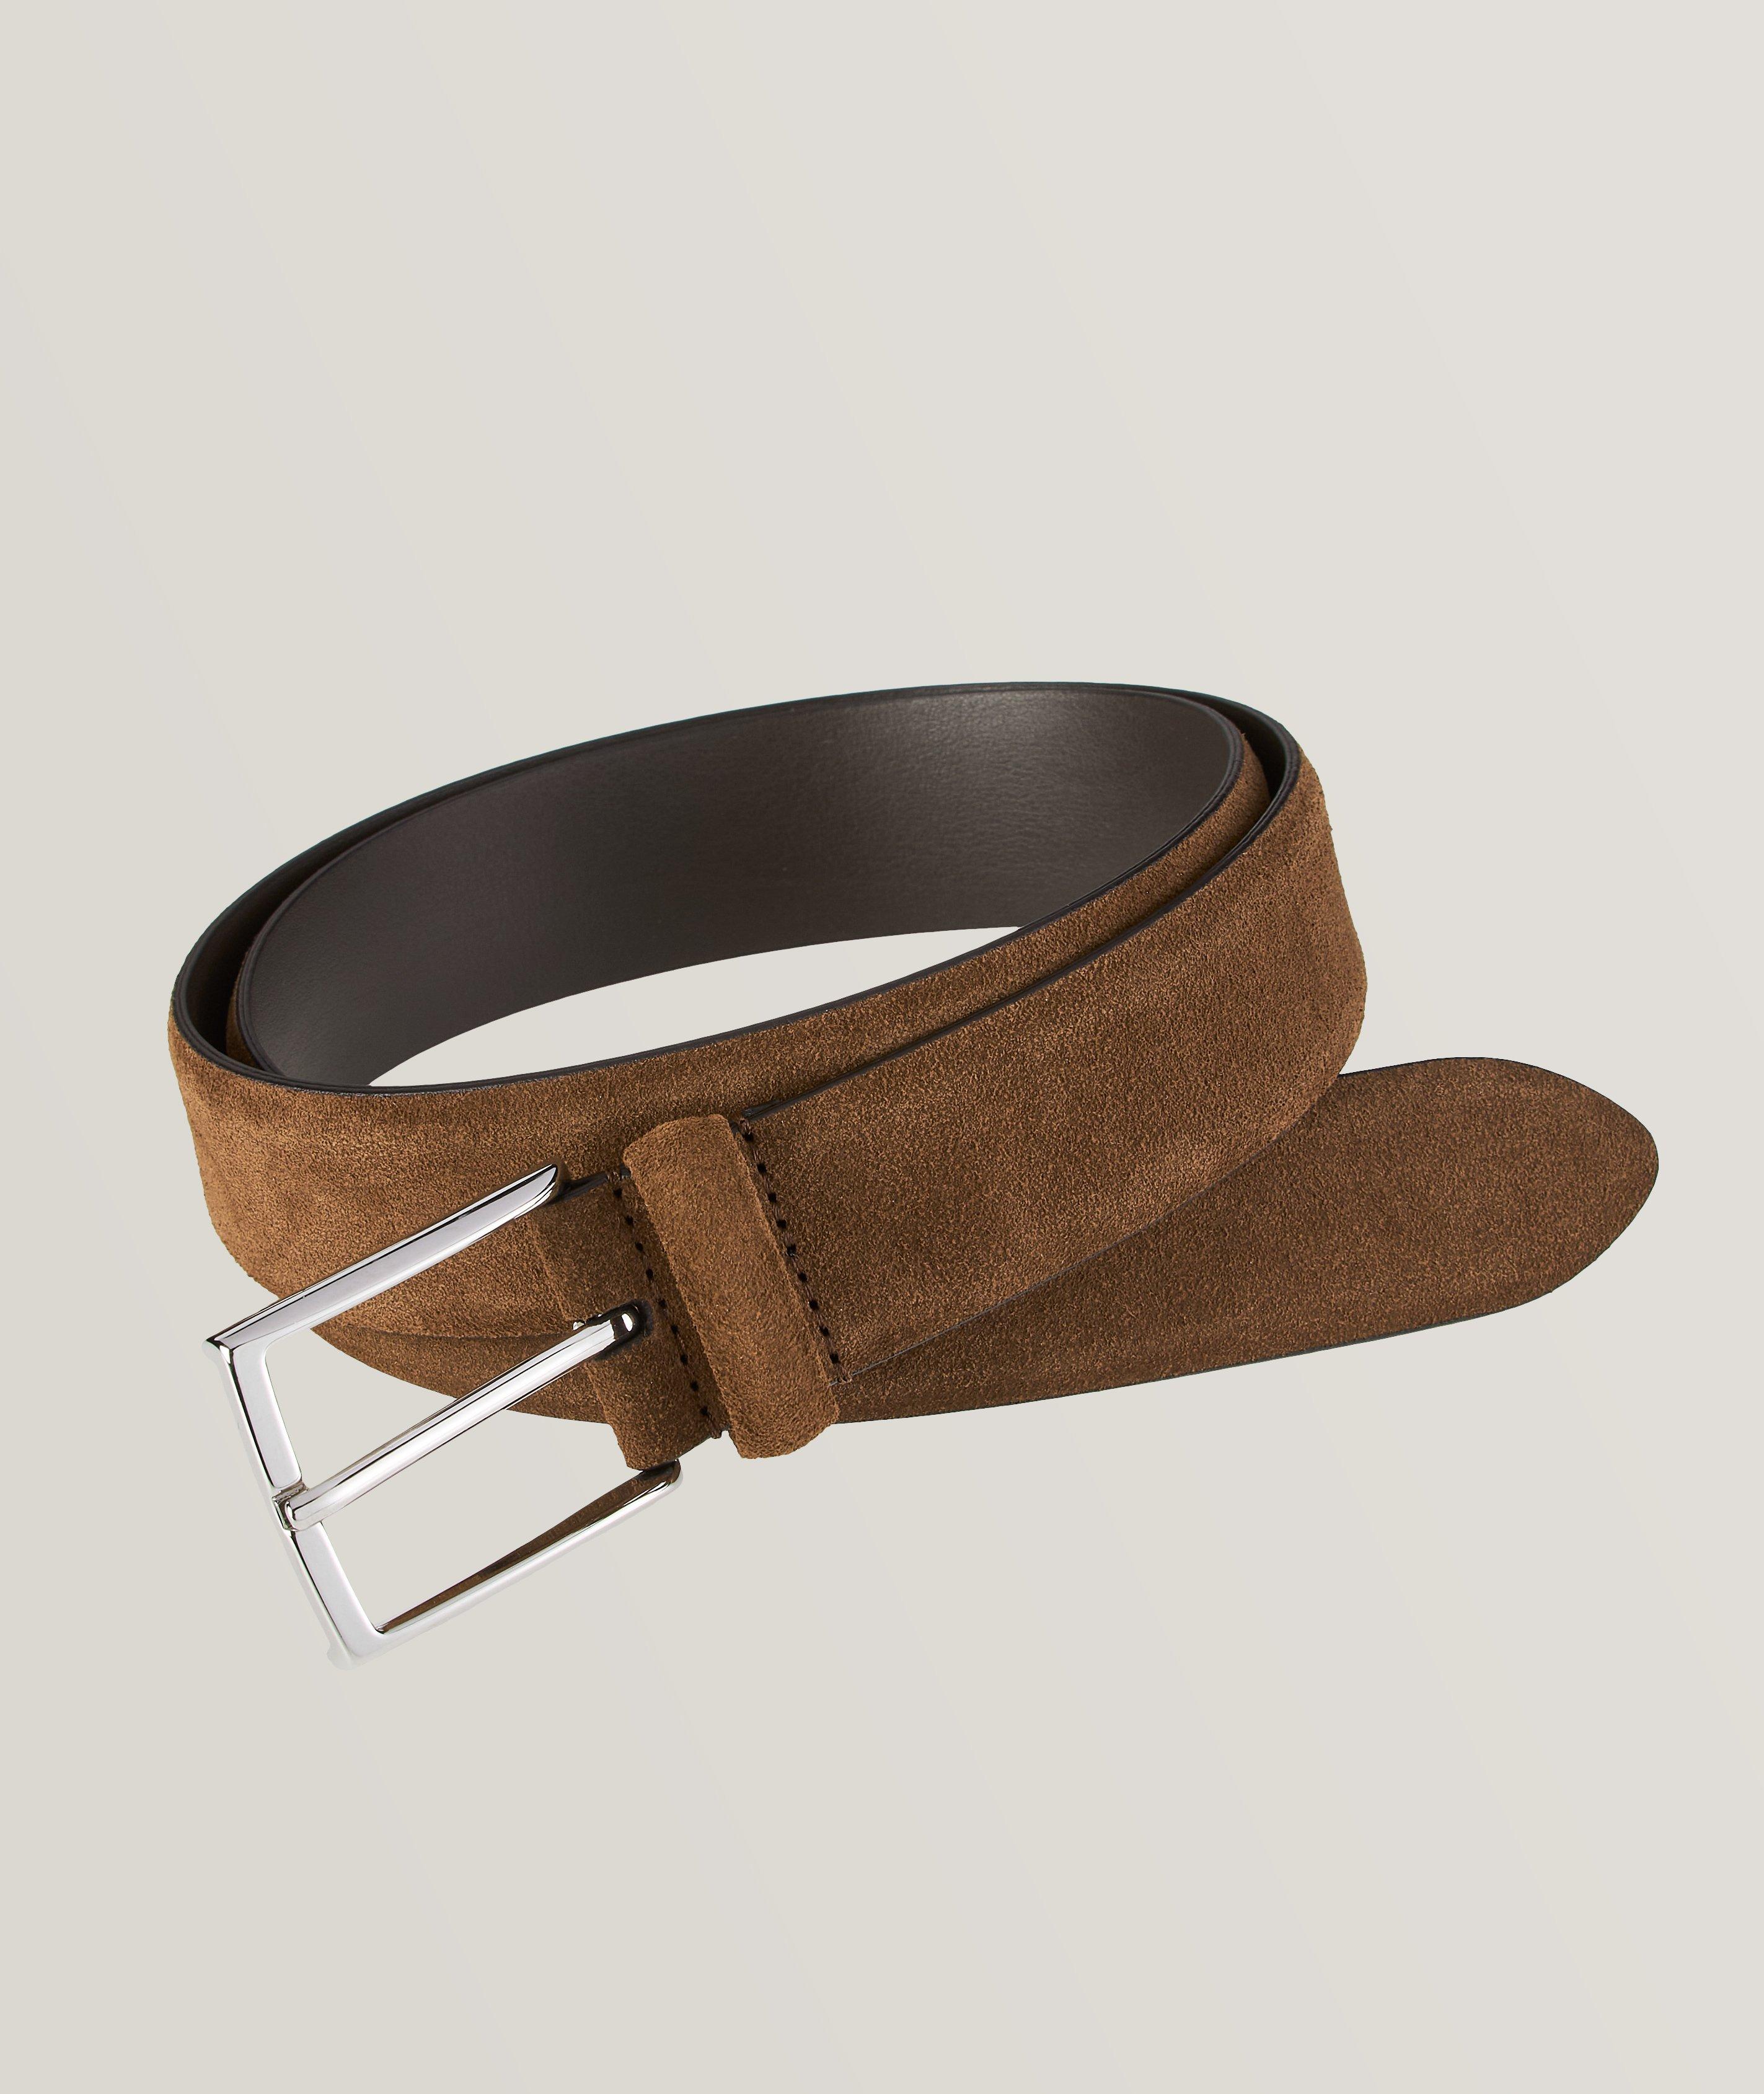 Suede Square Pin-Buckle Belt image 0